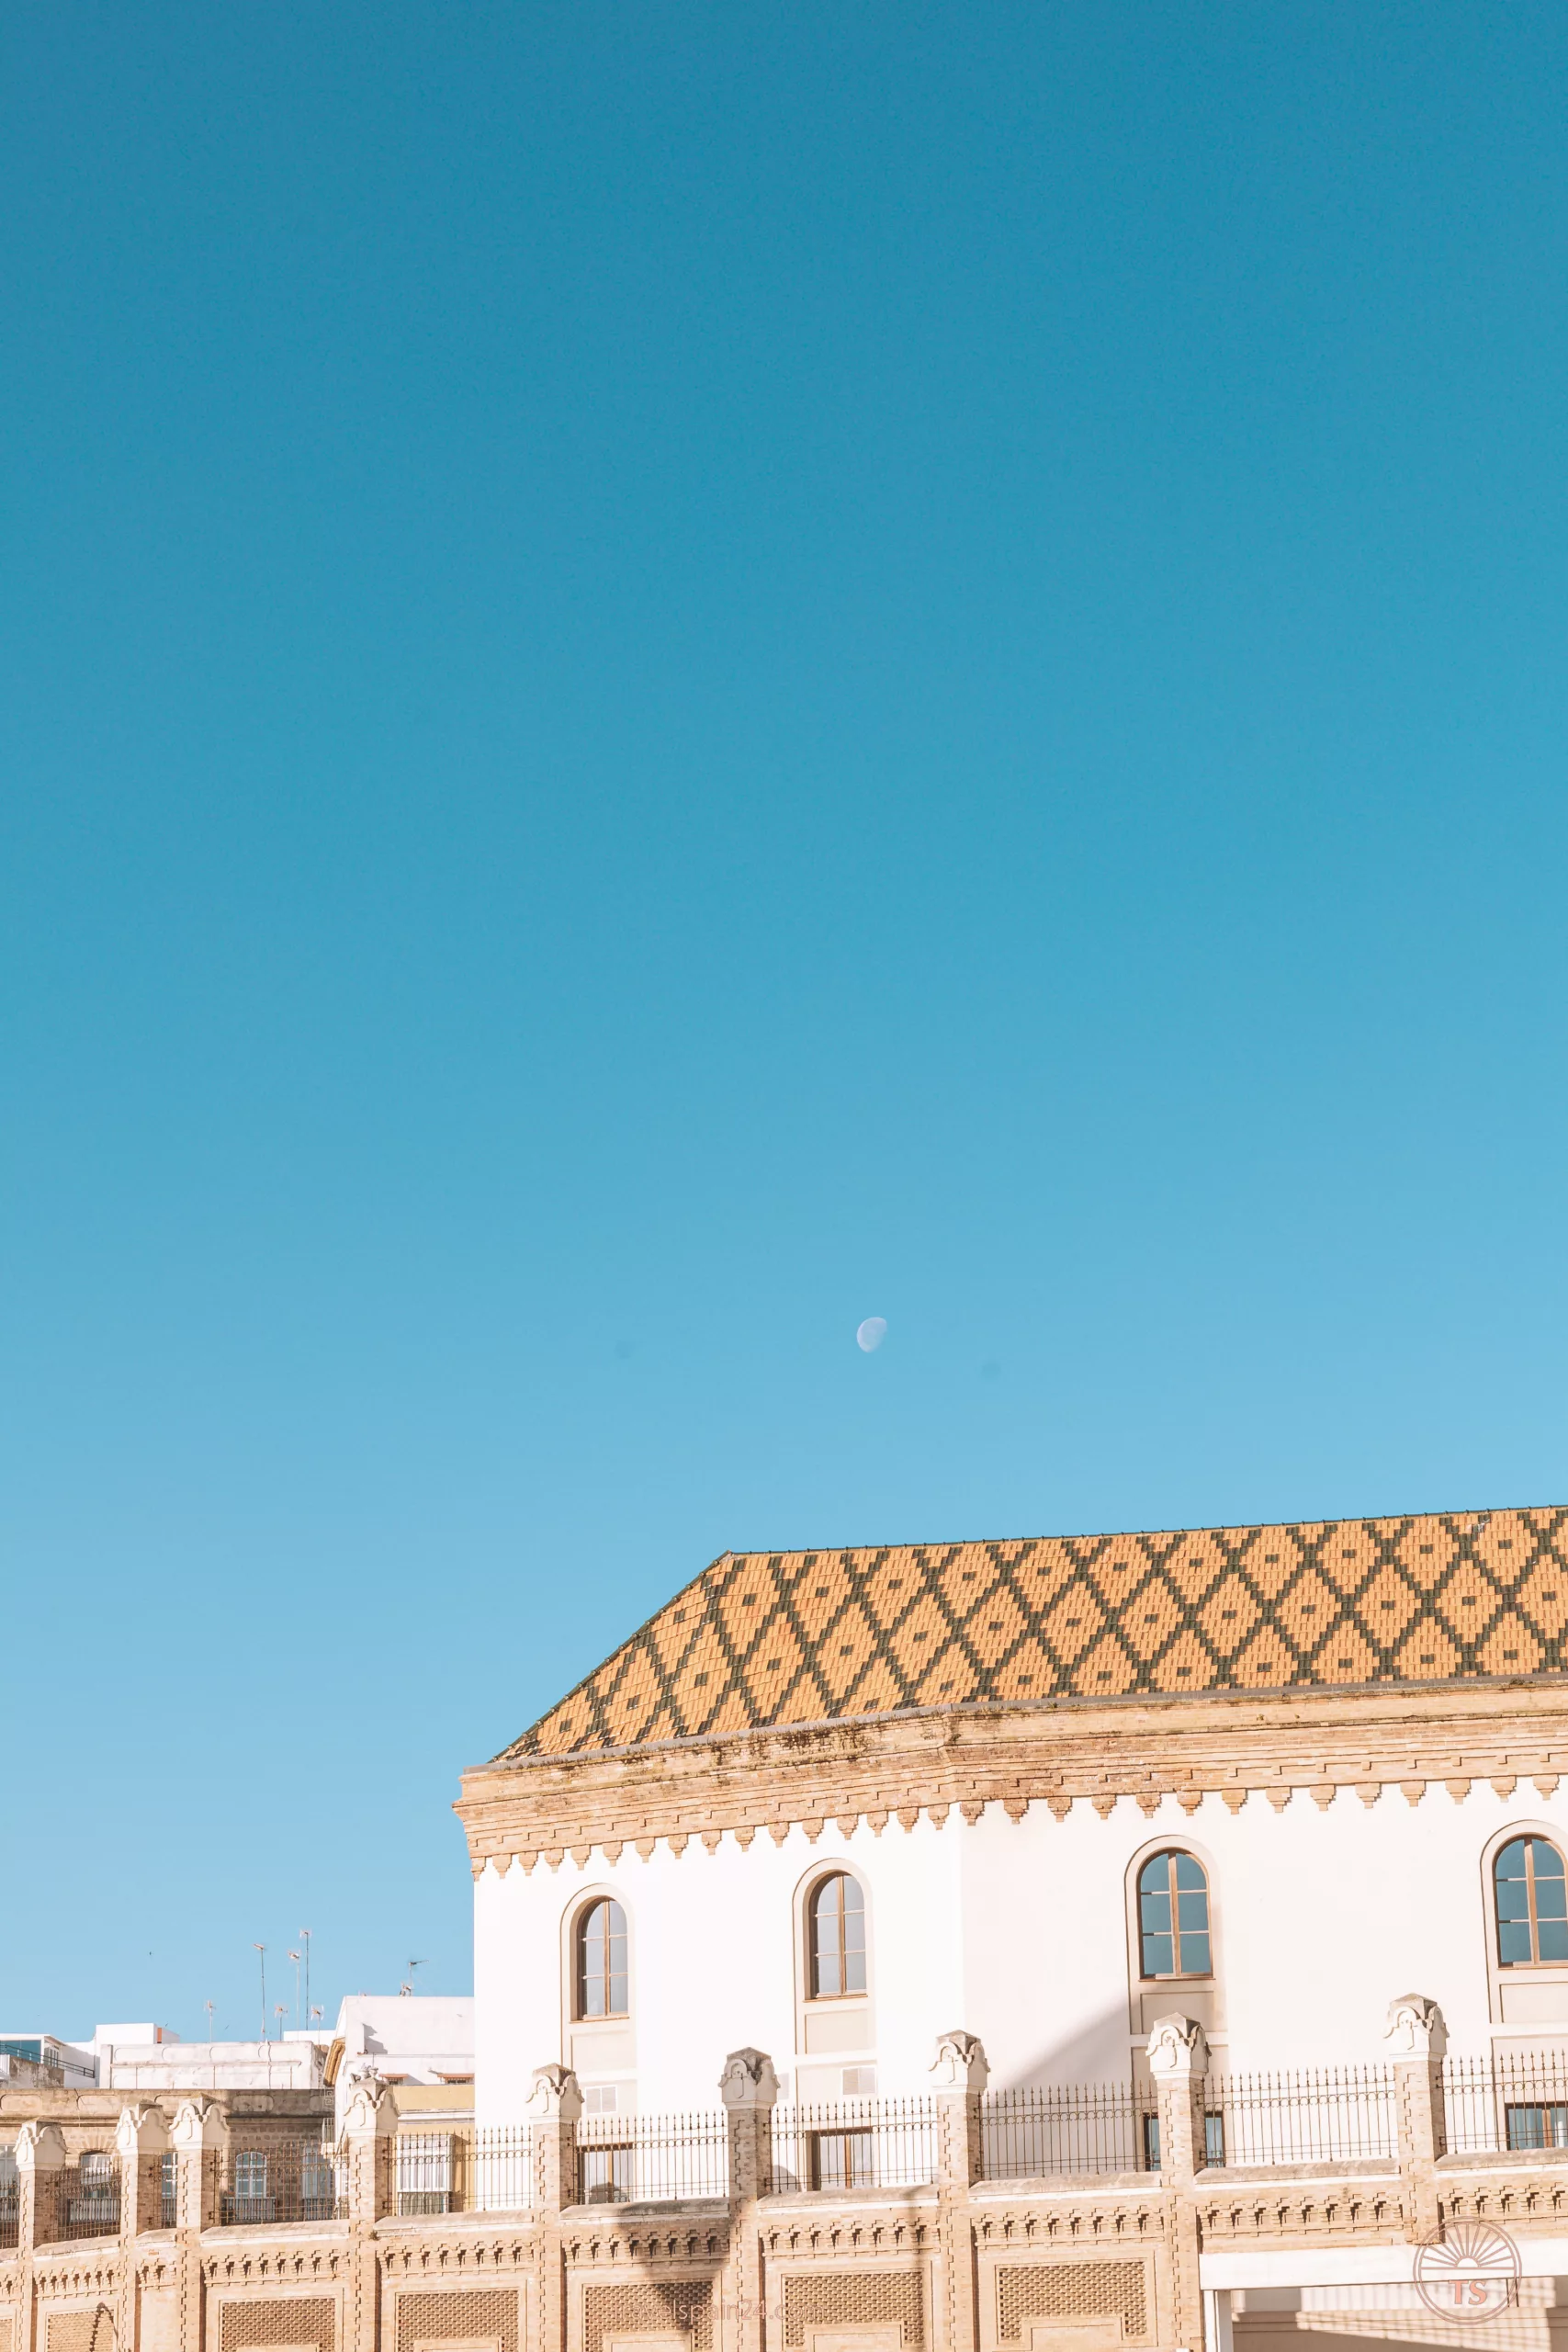 View of the Palacio de Congresos de Cádiz on a sunny morning, with the moon still visible in the sky. This image captures the architectural beauty of this landmark in Cadiz